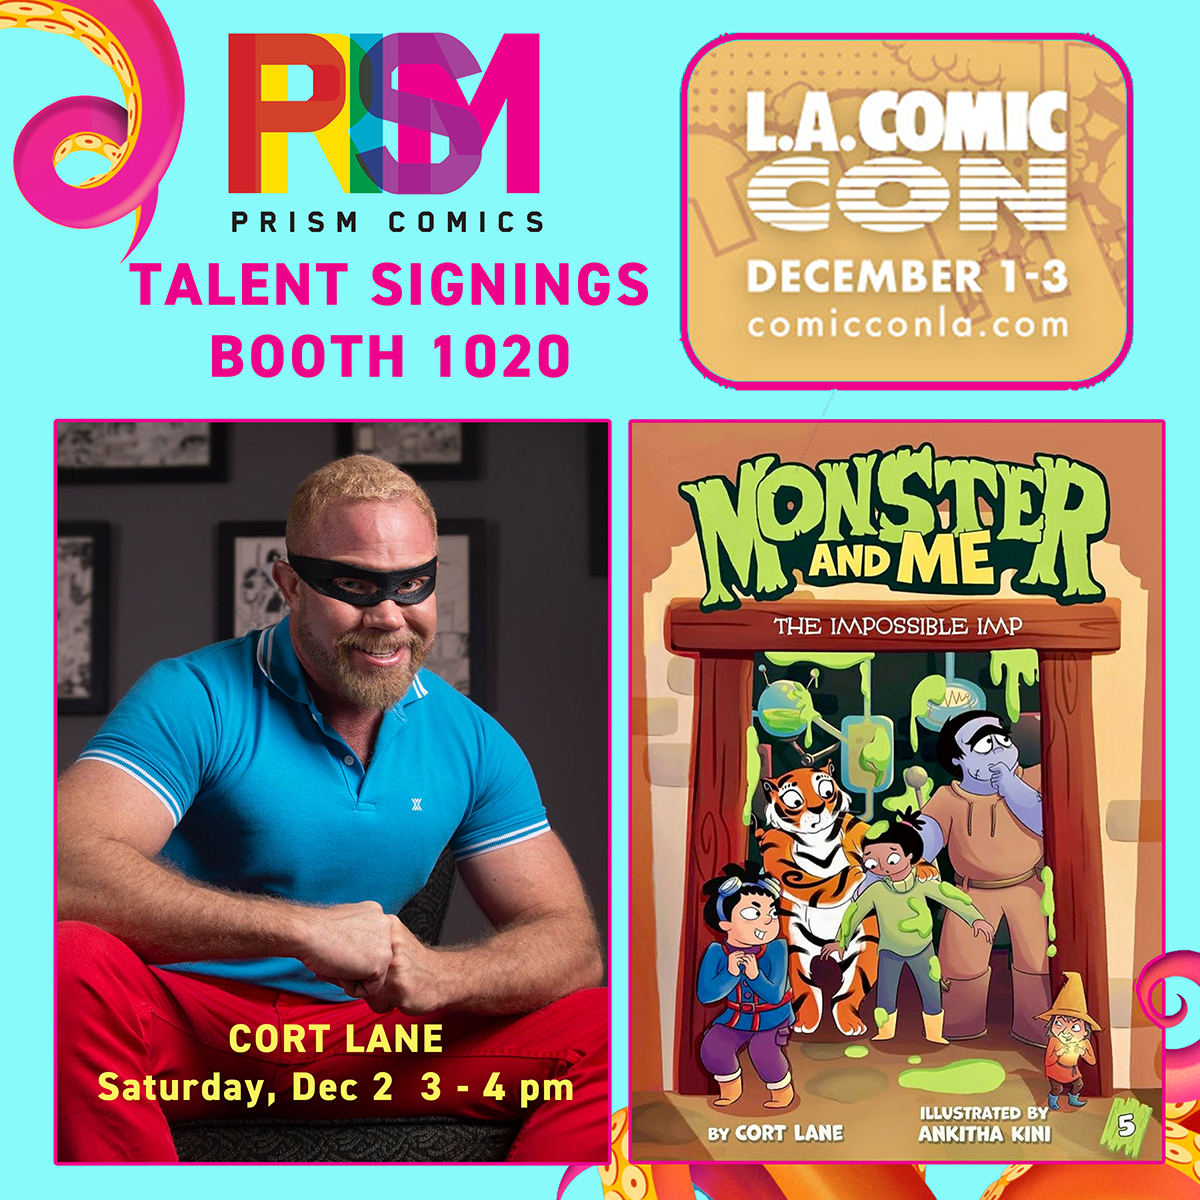 #MonsterandMe author #CortLane will be at @comicconla this Saturday to sign copies of the #TheImpossibleImp. In this new #MonsterandMe book, Freddy and the whole gang must track down a fantastical causing mischief around the palace! We hope to see you there. 🧚‍♂️

#BeeAReader🐝